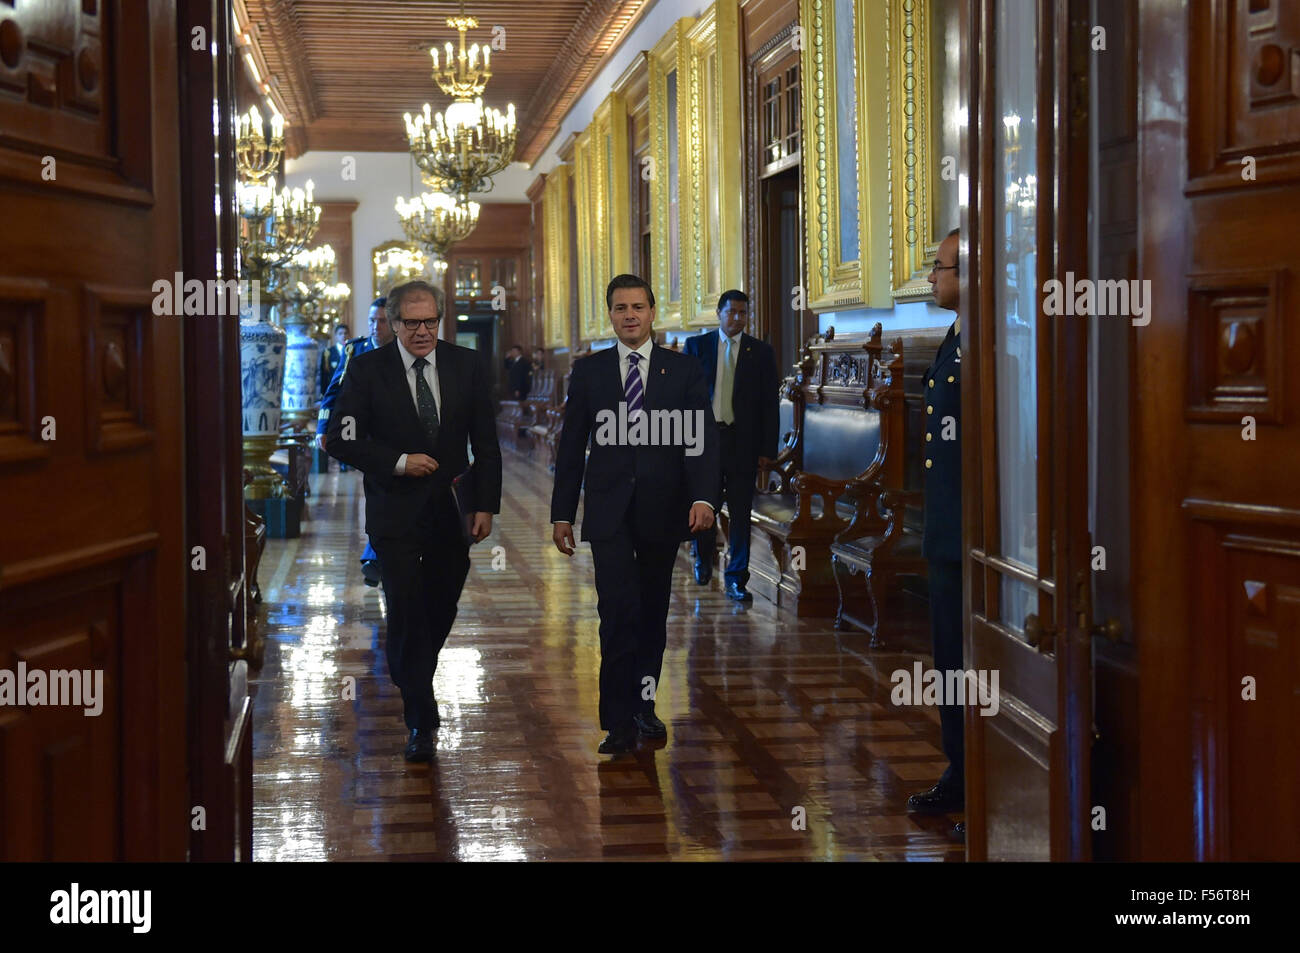 Mexico City, Mexico. 28th Oct, 2015. Image provided by Mexico's Presidency shows Mexican President Enrique Pena Nieto (R) receiving Luis Almagro (L), Secretary General of the Organization of American States (OAS), before their meeting at National Palace in Mexico City, capital of Mexico, Oct. 28, 2015. © Mexico's Presidency/Xinhua/Alamy Live News Stock Photo